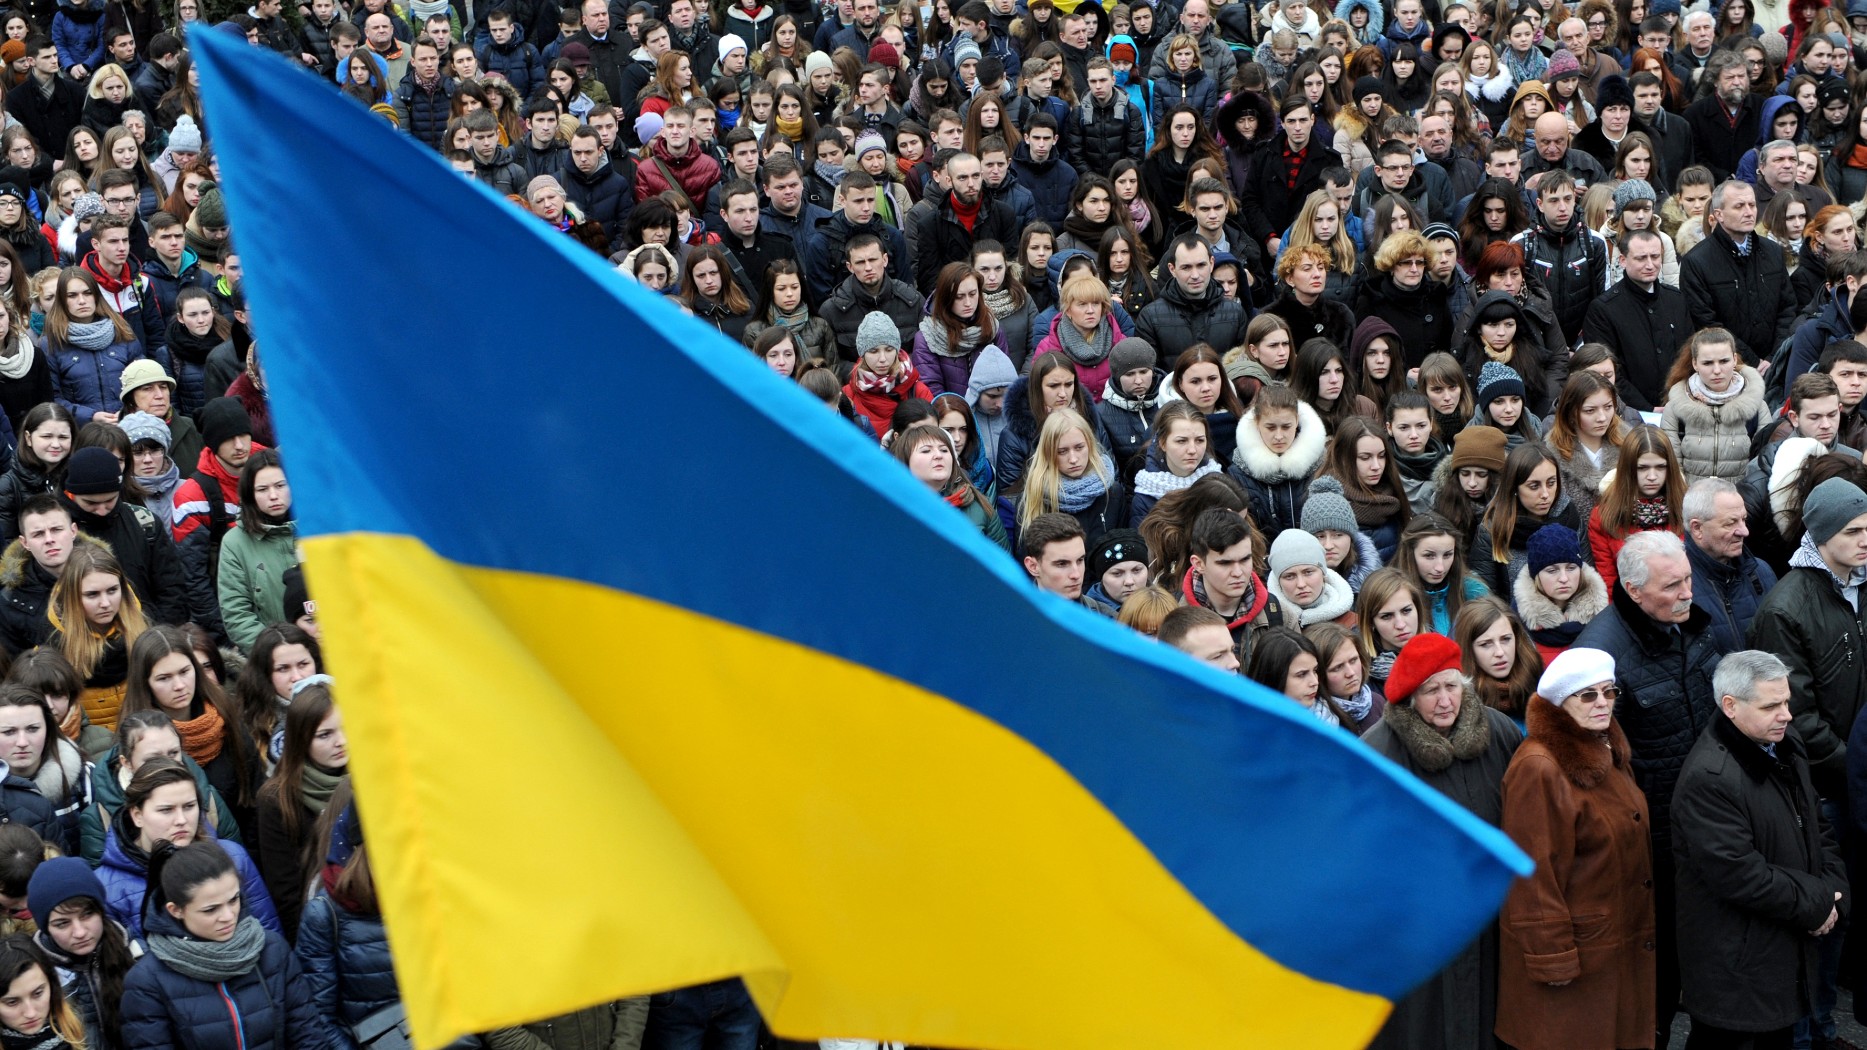 People hold a Ukrainian flag during a ceremony on February 19, 2016 in Lviv, western Ukraine to mark 2nd anniversary of an anti-government protest in 2014